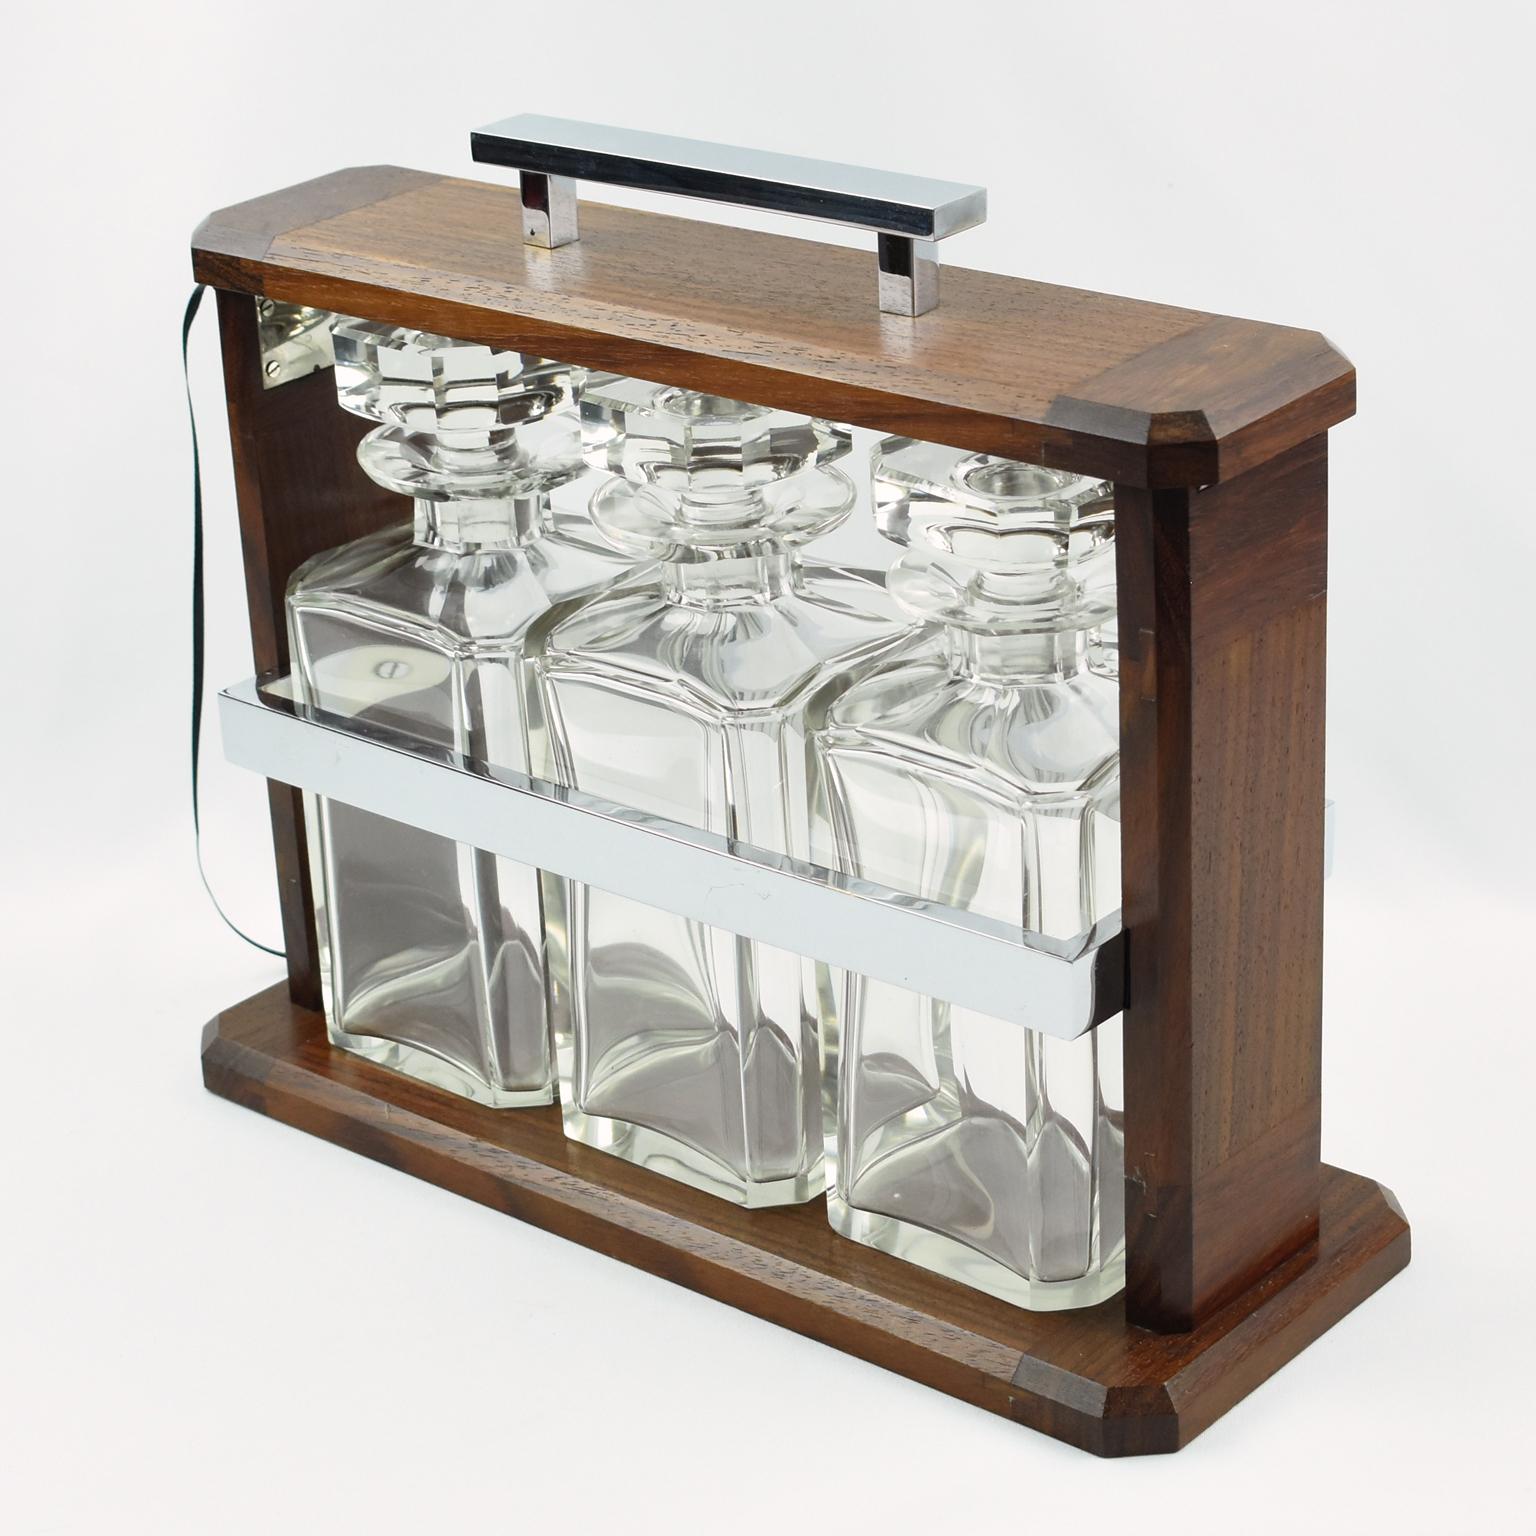 Stunning Art Deco tantalus or cave a liqueur, barware accessory. The geometric mounted case is made of solid walnut with chromed metal holding sides and handle. Three crystal decanters with faceted stopper are held in place in a chrome compartment.